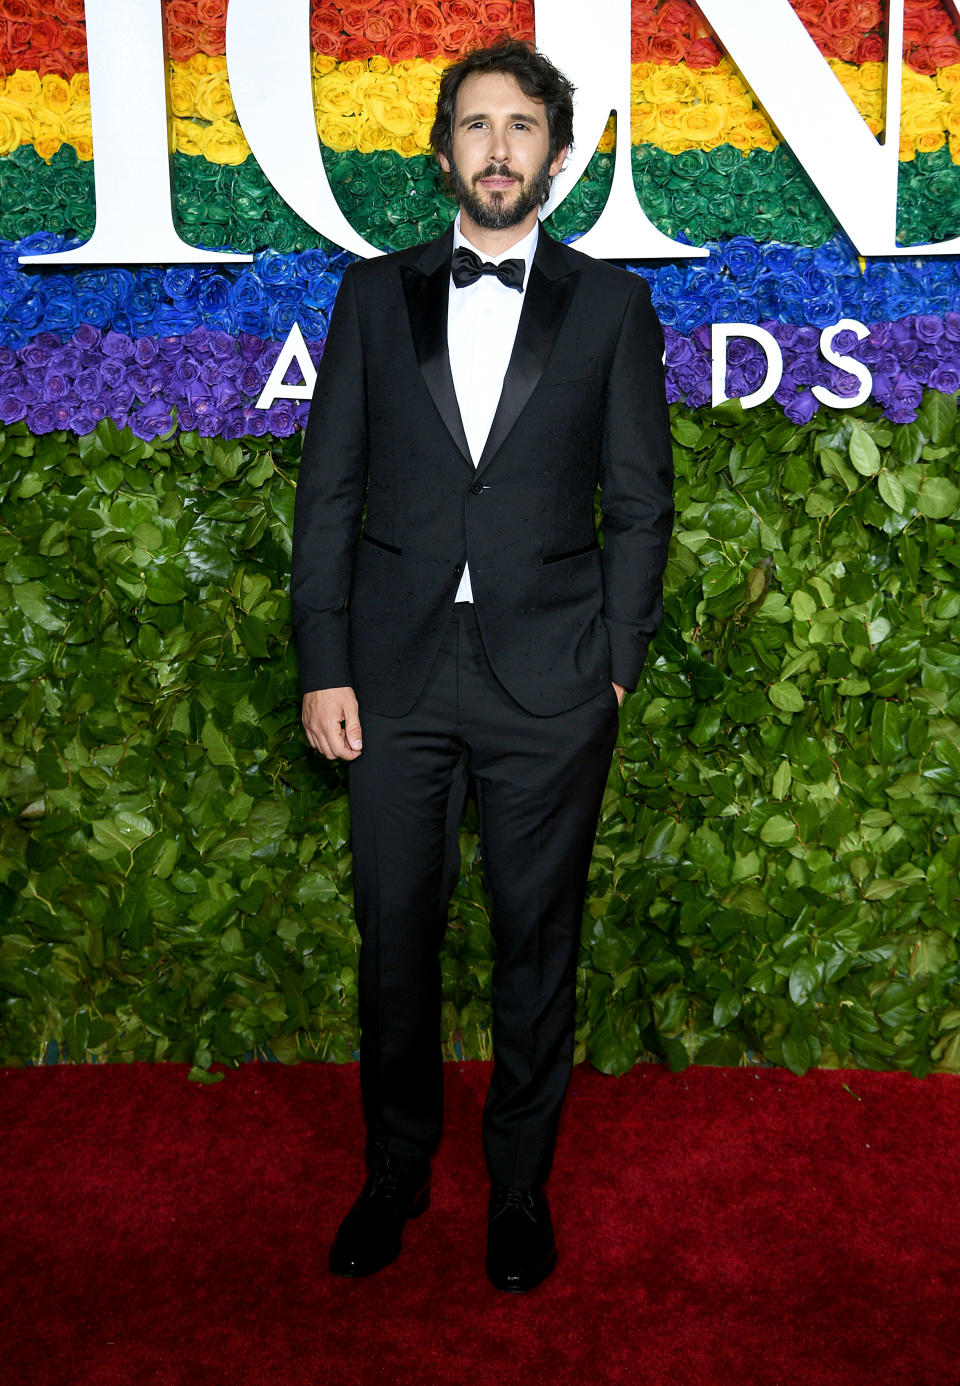 NEW YORK, NEW YORK - JUNE 09: Josh Groban attends the 73rd Annual Tony Awards at Radio City Music Hall on June 09, 2019 in New York City. (Photo by Dimitrios Kambouris/Getty Images for Tony Awards Productions)